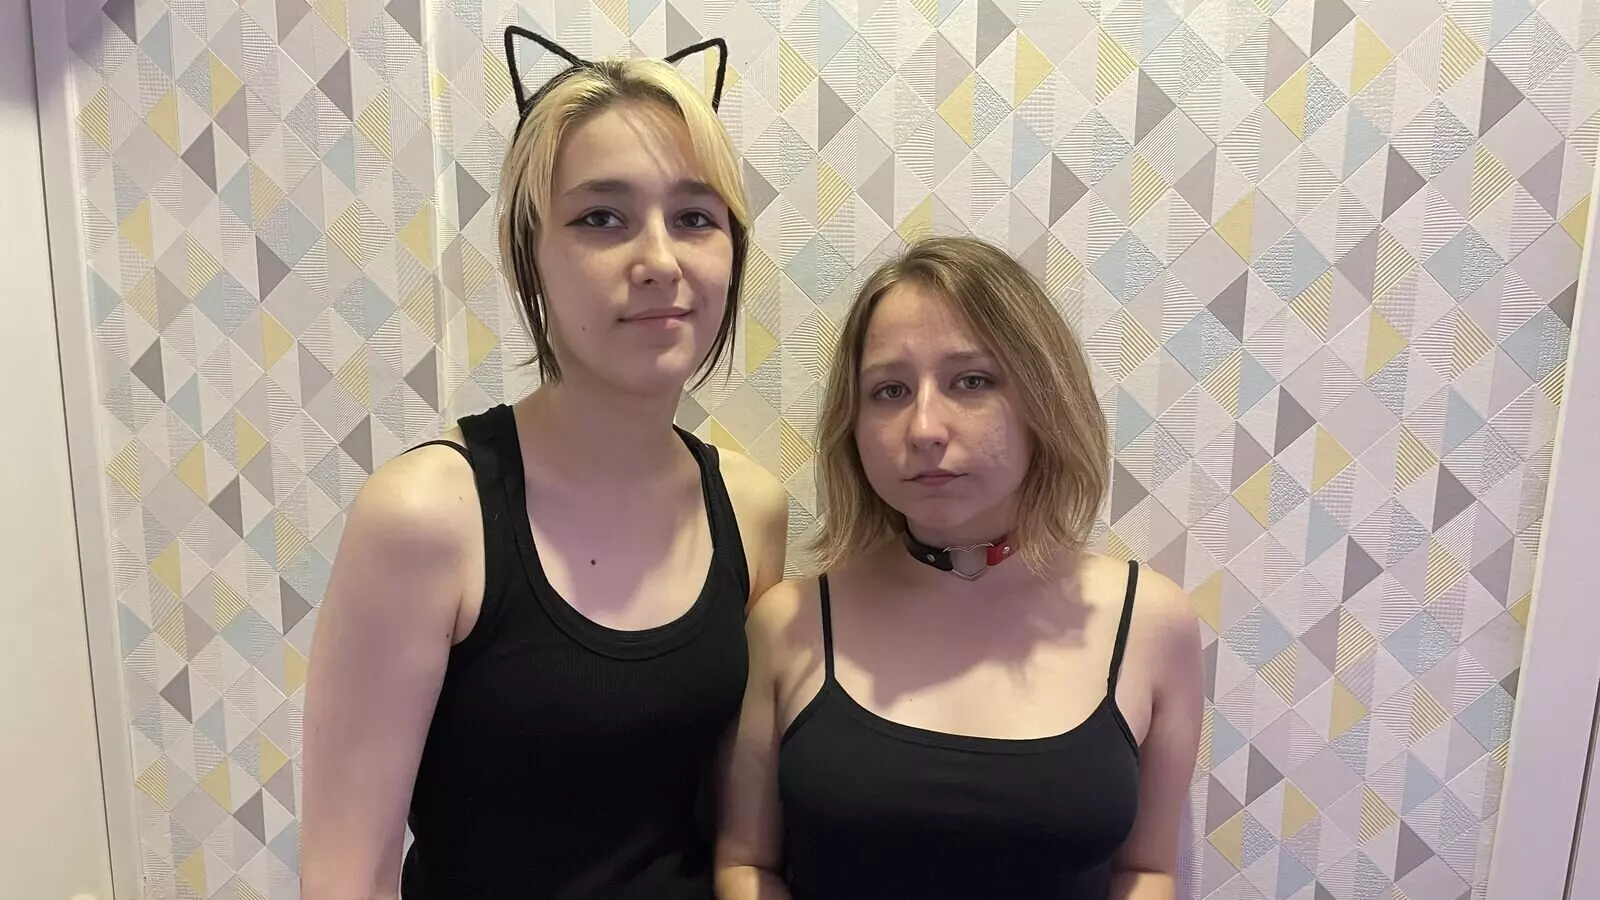  RELATED VIDEOS - WEBCAM AnnAndKelly STRIPS AND MASTURBATES